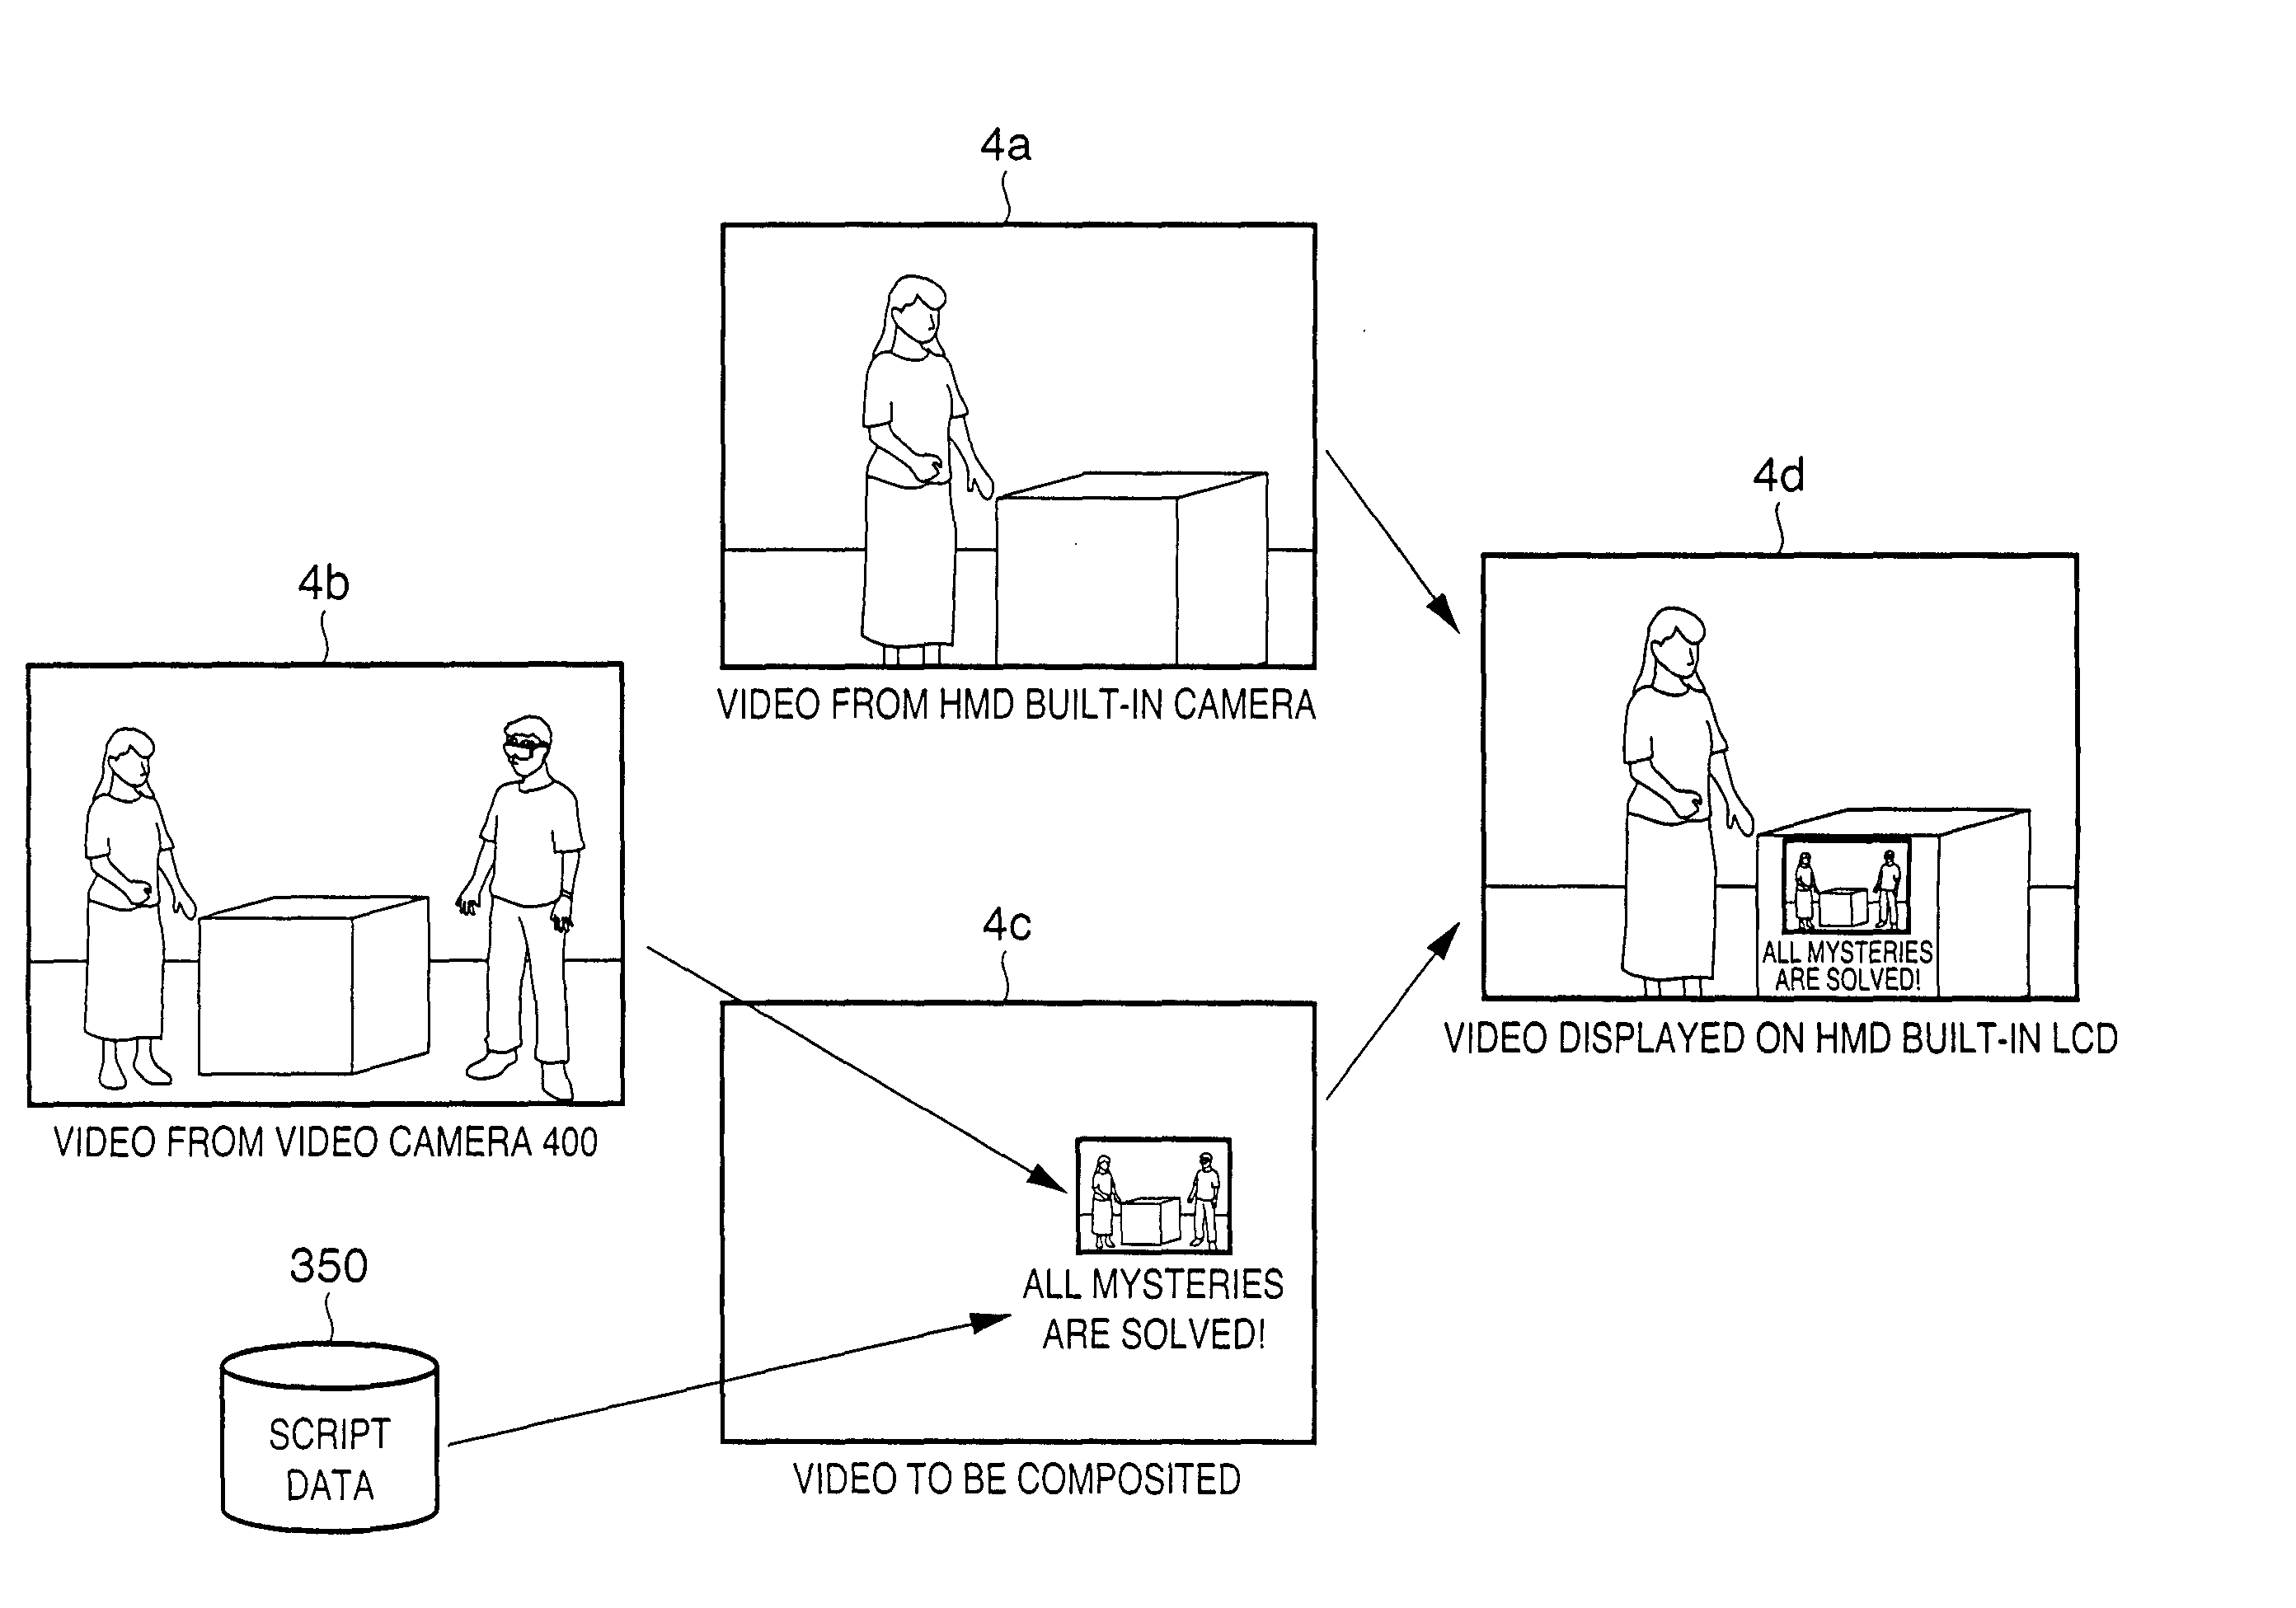 Image composition apparatus and method